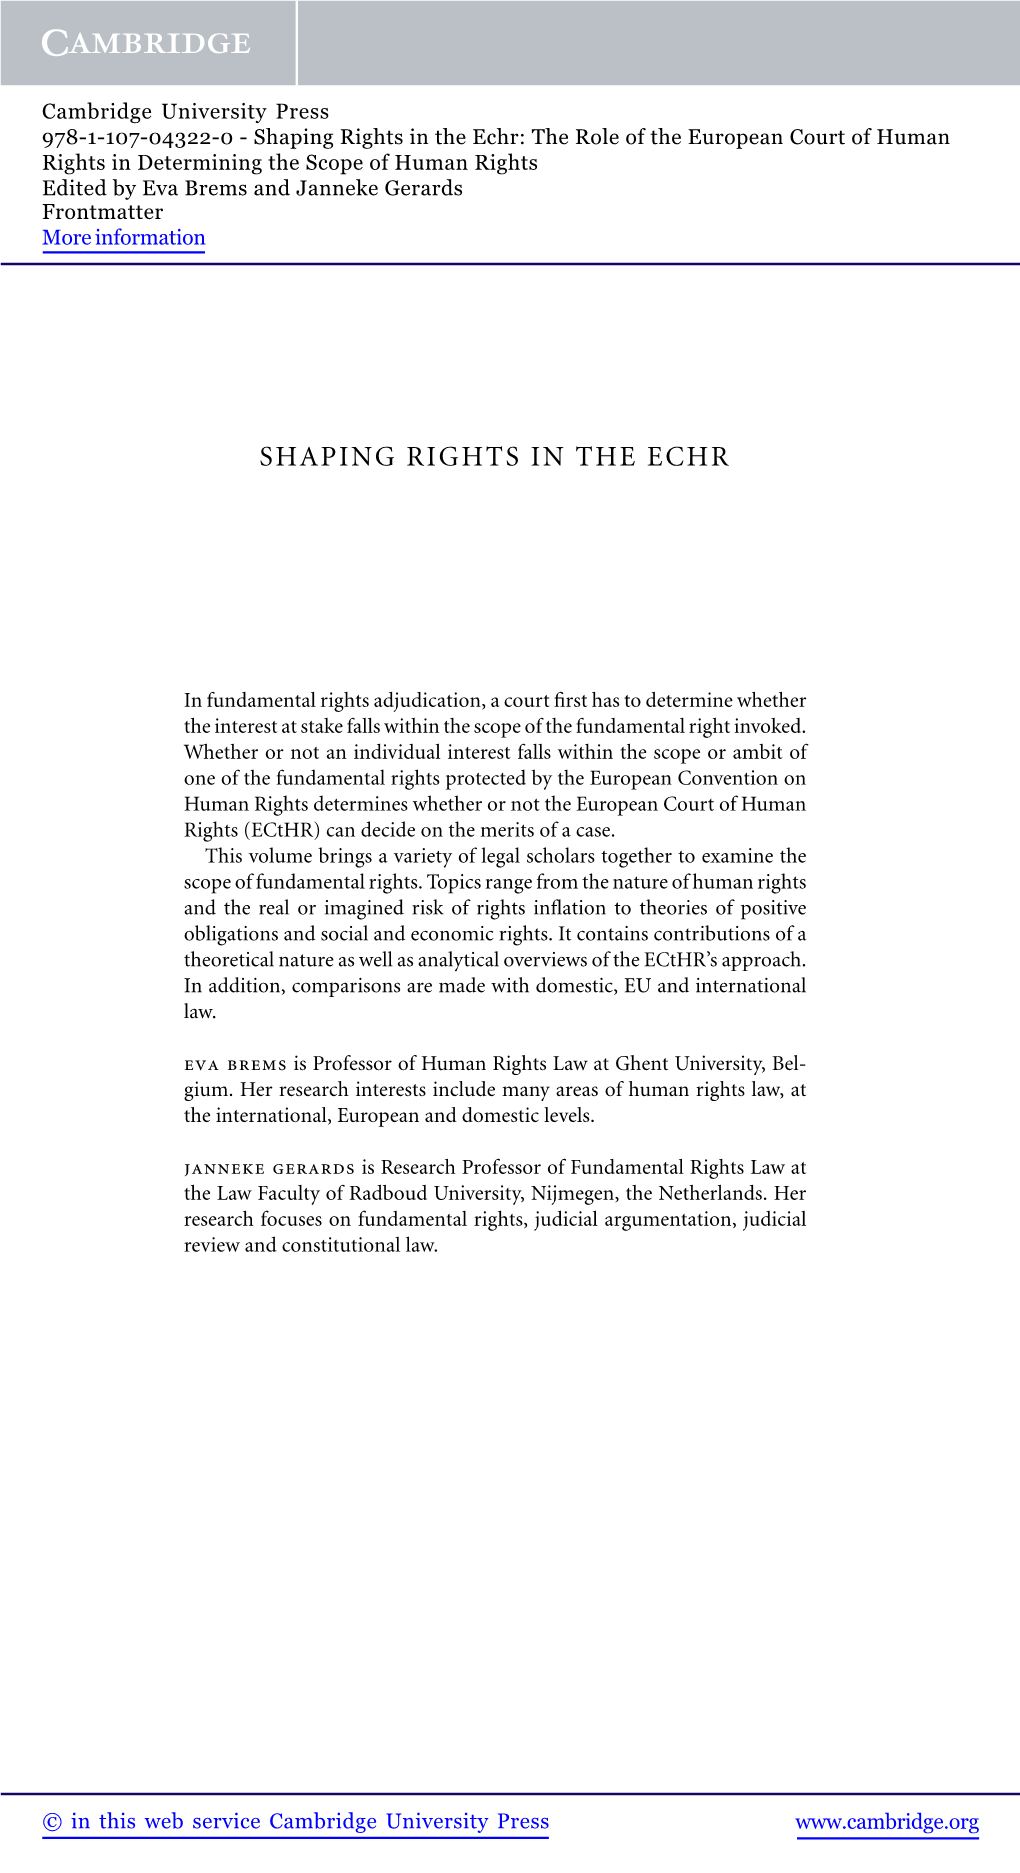 Shaping Rights in the Echr